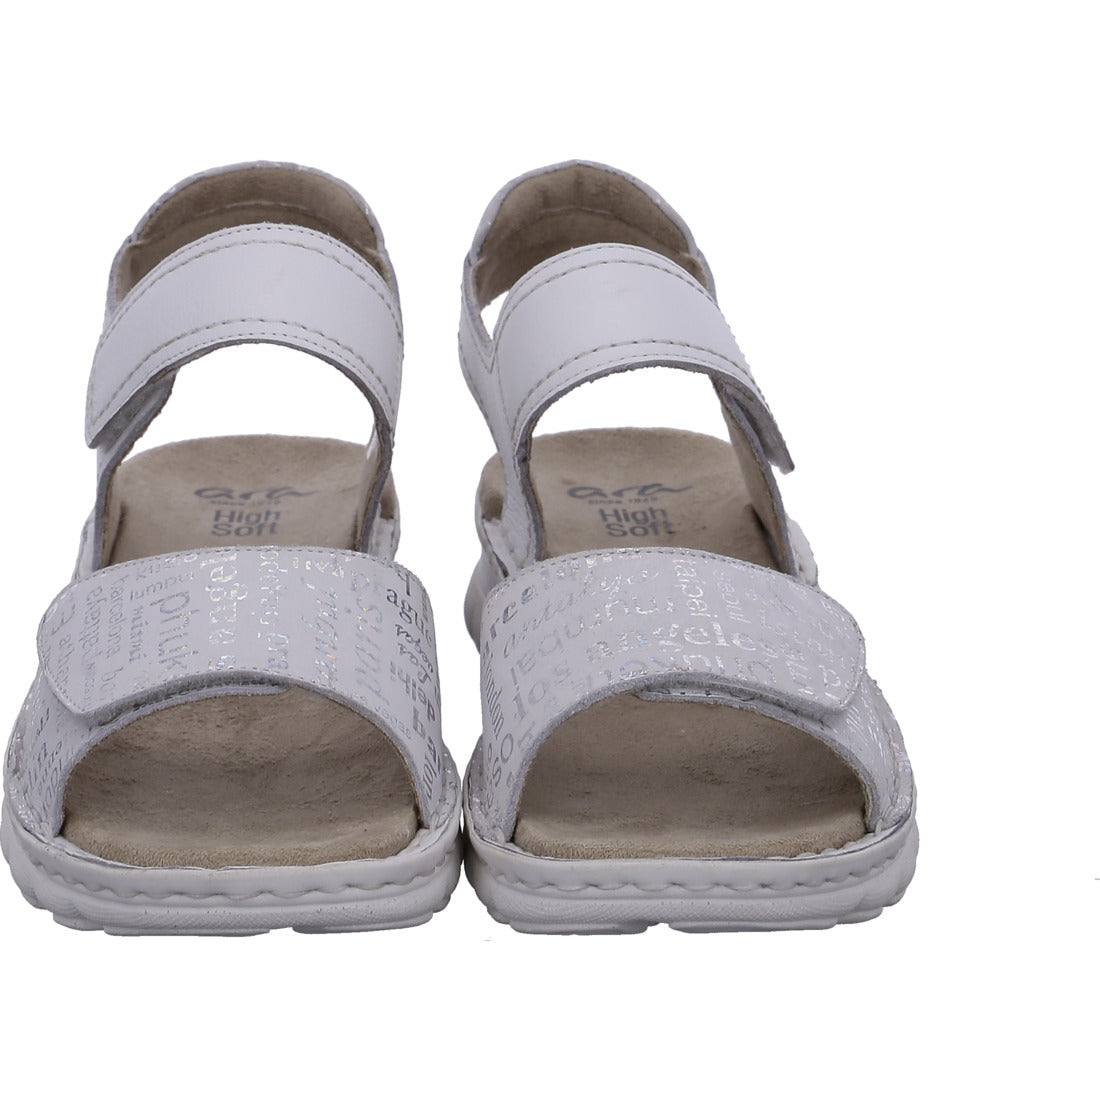 Ara 12-47209 67 G Fit White Velcro Sandals with Slingback Strap